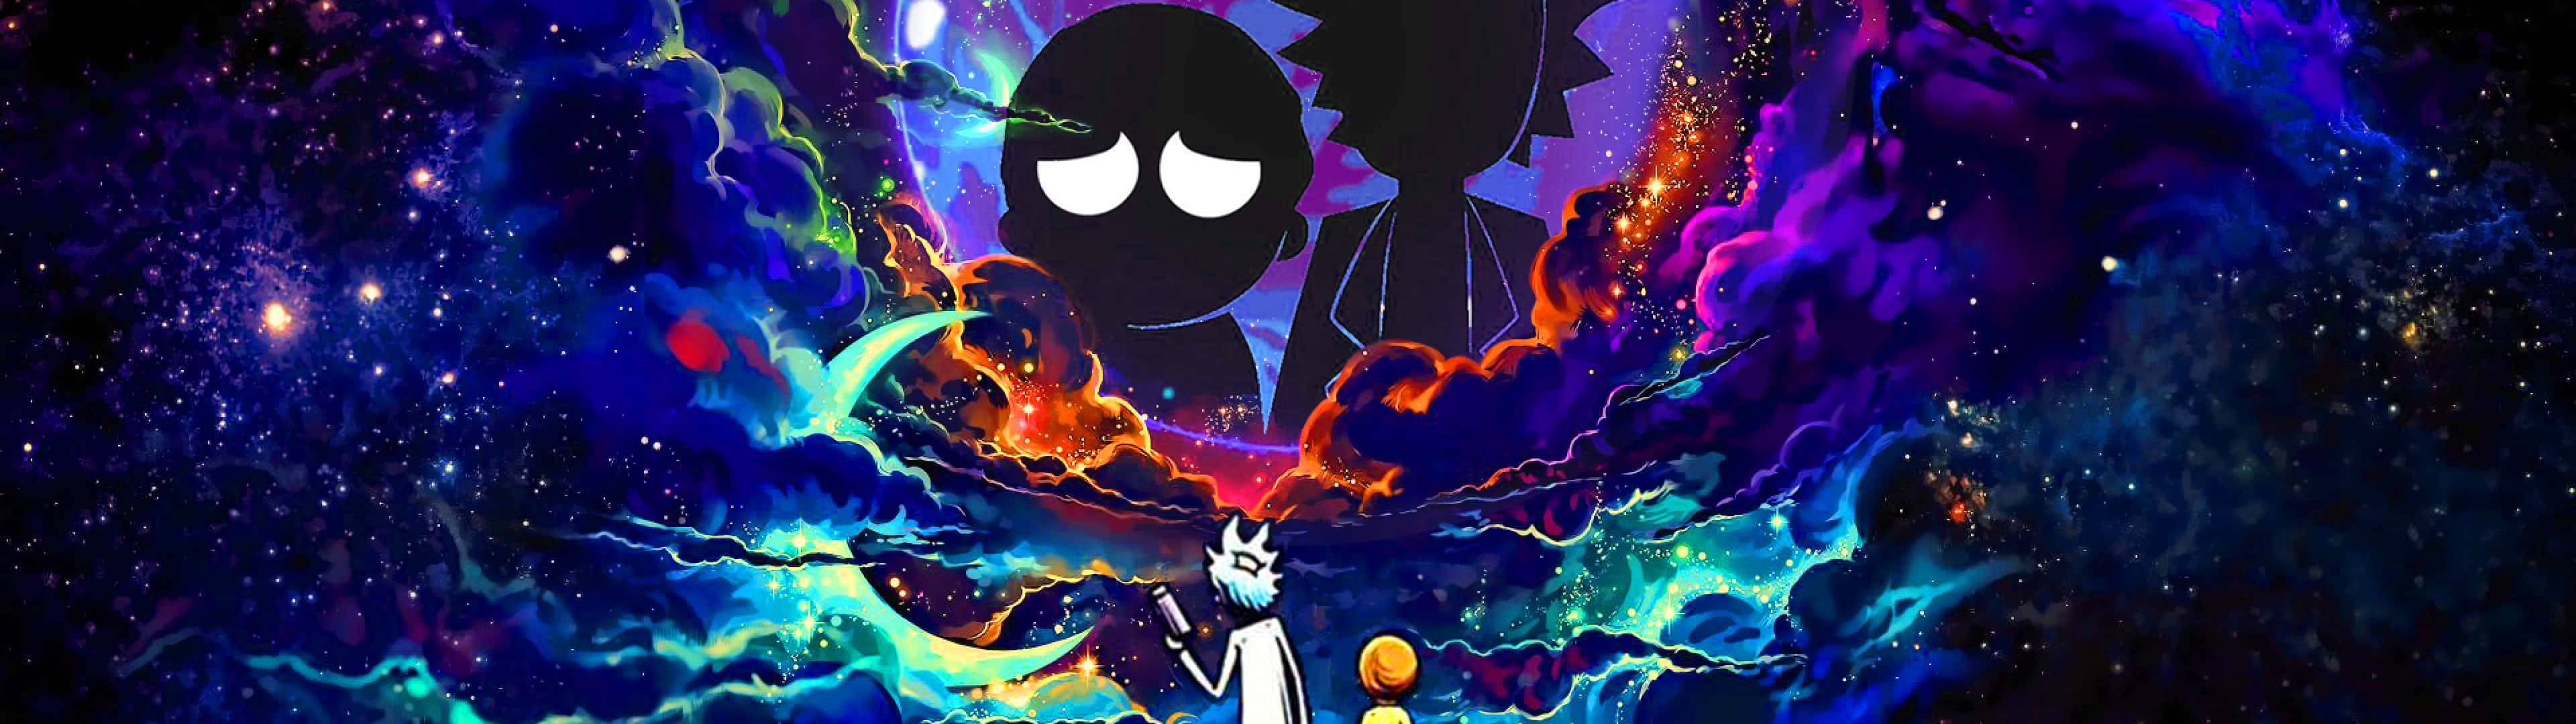 3840X1080 Ricky And Morty Picture